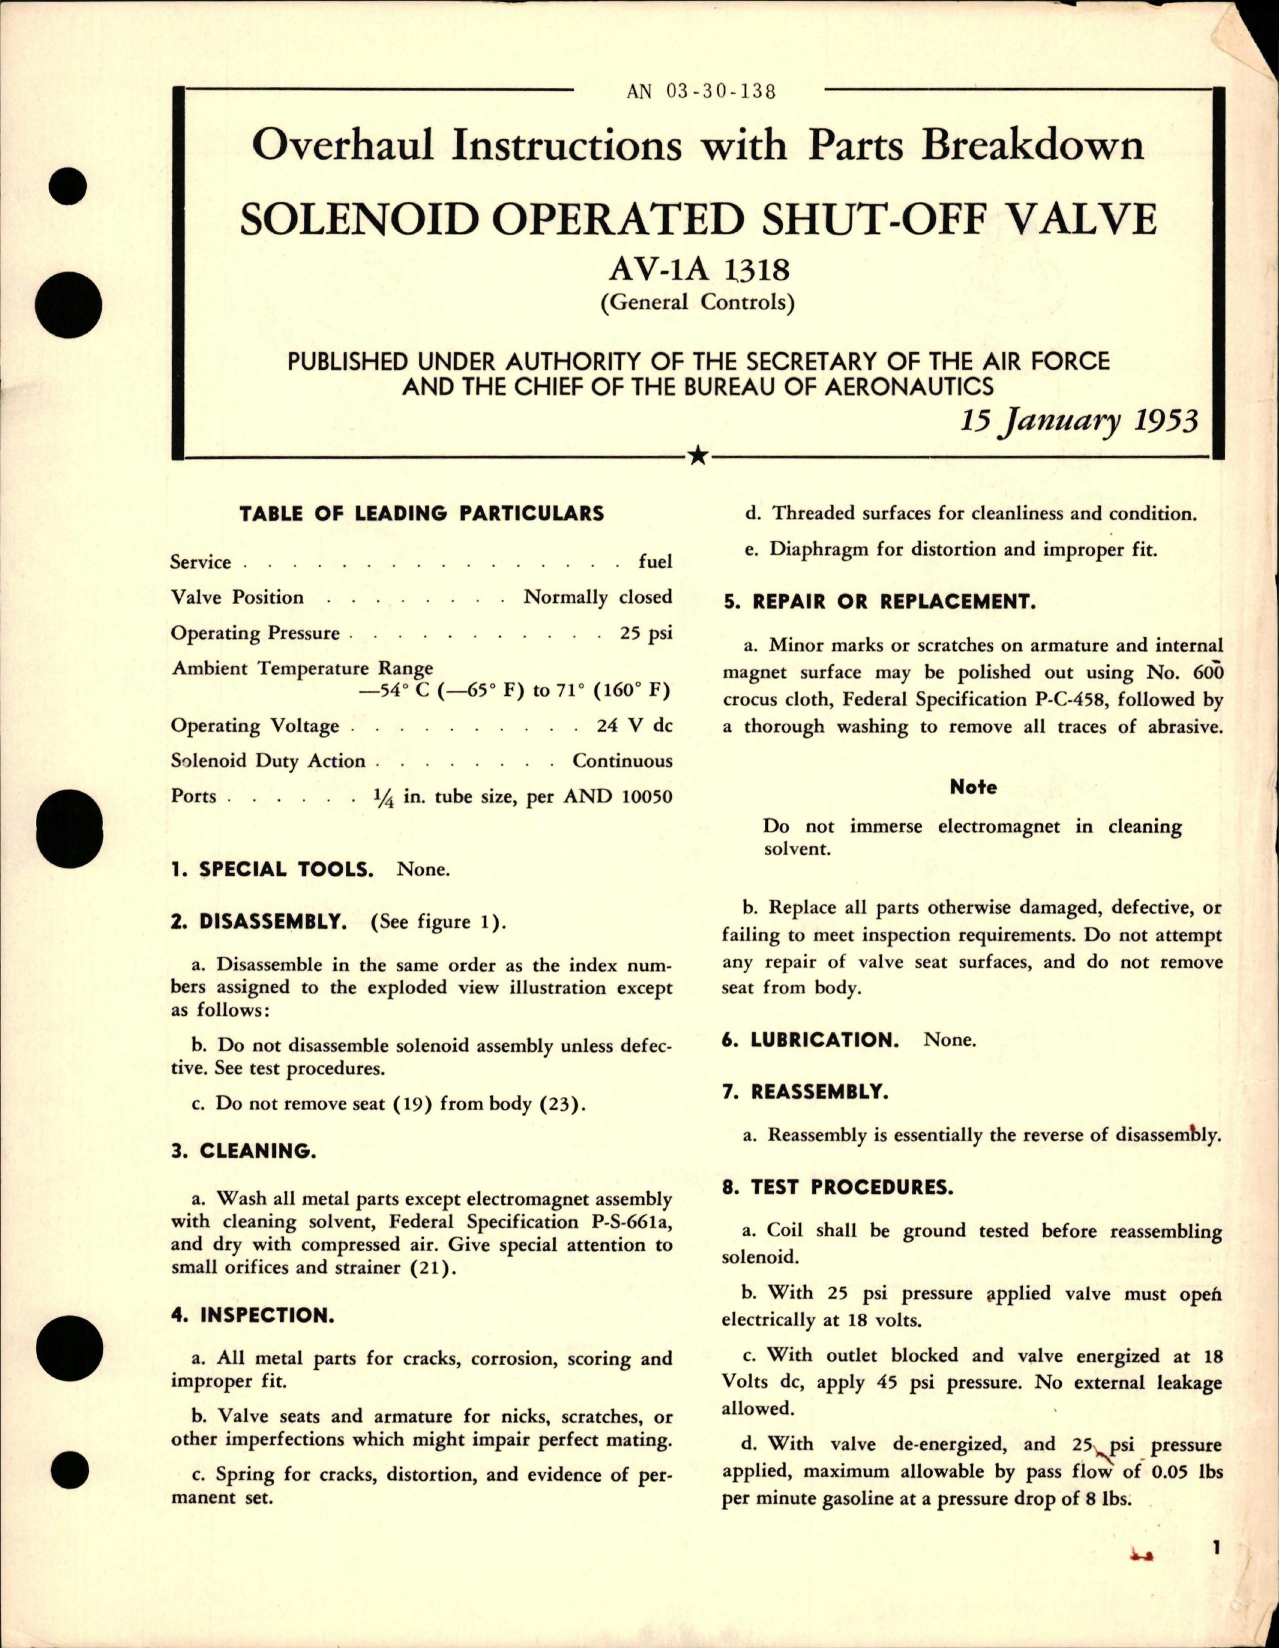 Sample page 1 from AirCorps Library document: Overhaul Instructions with Parts Breakdown for Solenoid Operated Shut-Off Valve - AV-1A 1318 